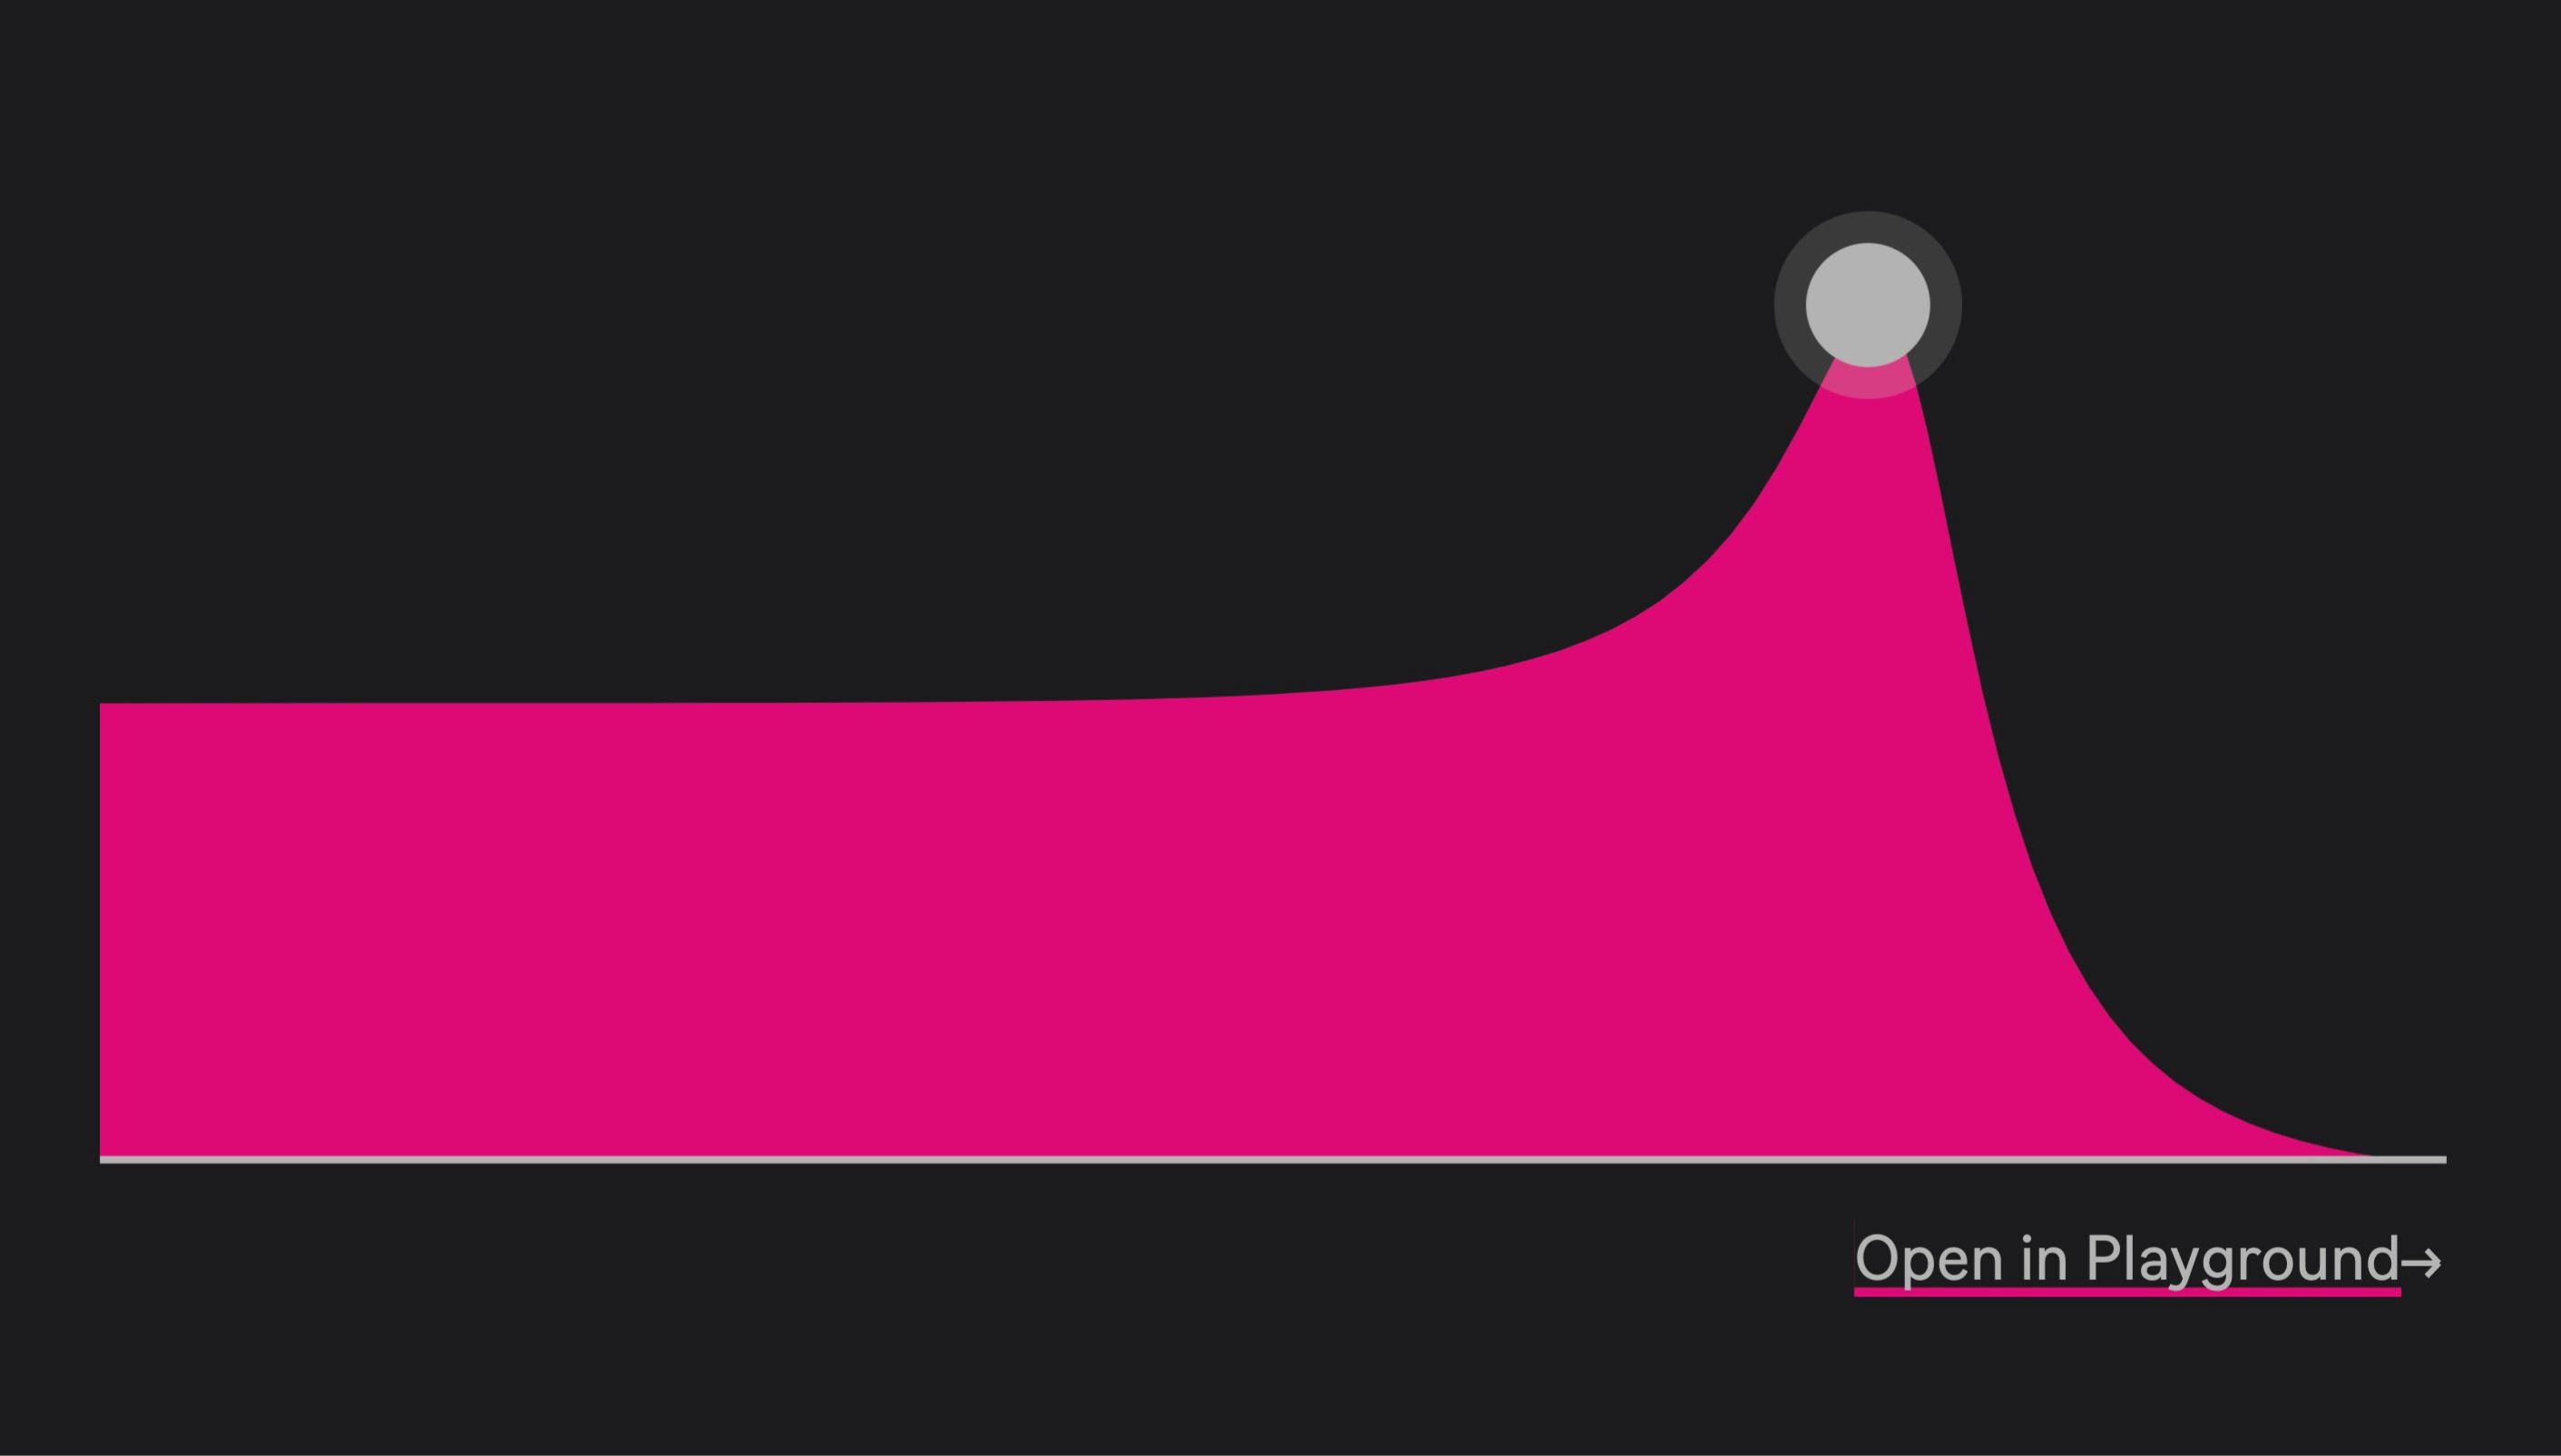 Pink slope showing the frequency and resonance of a Low-Pass Filter